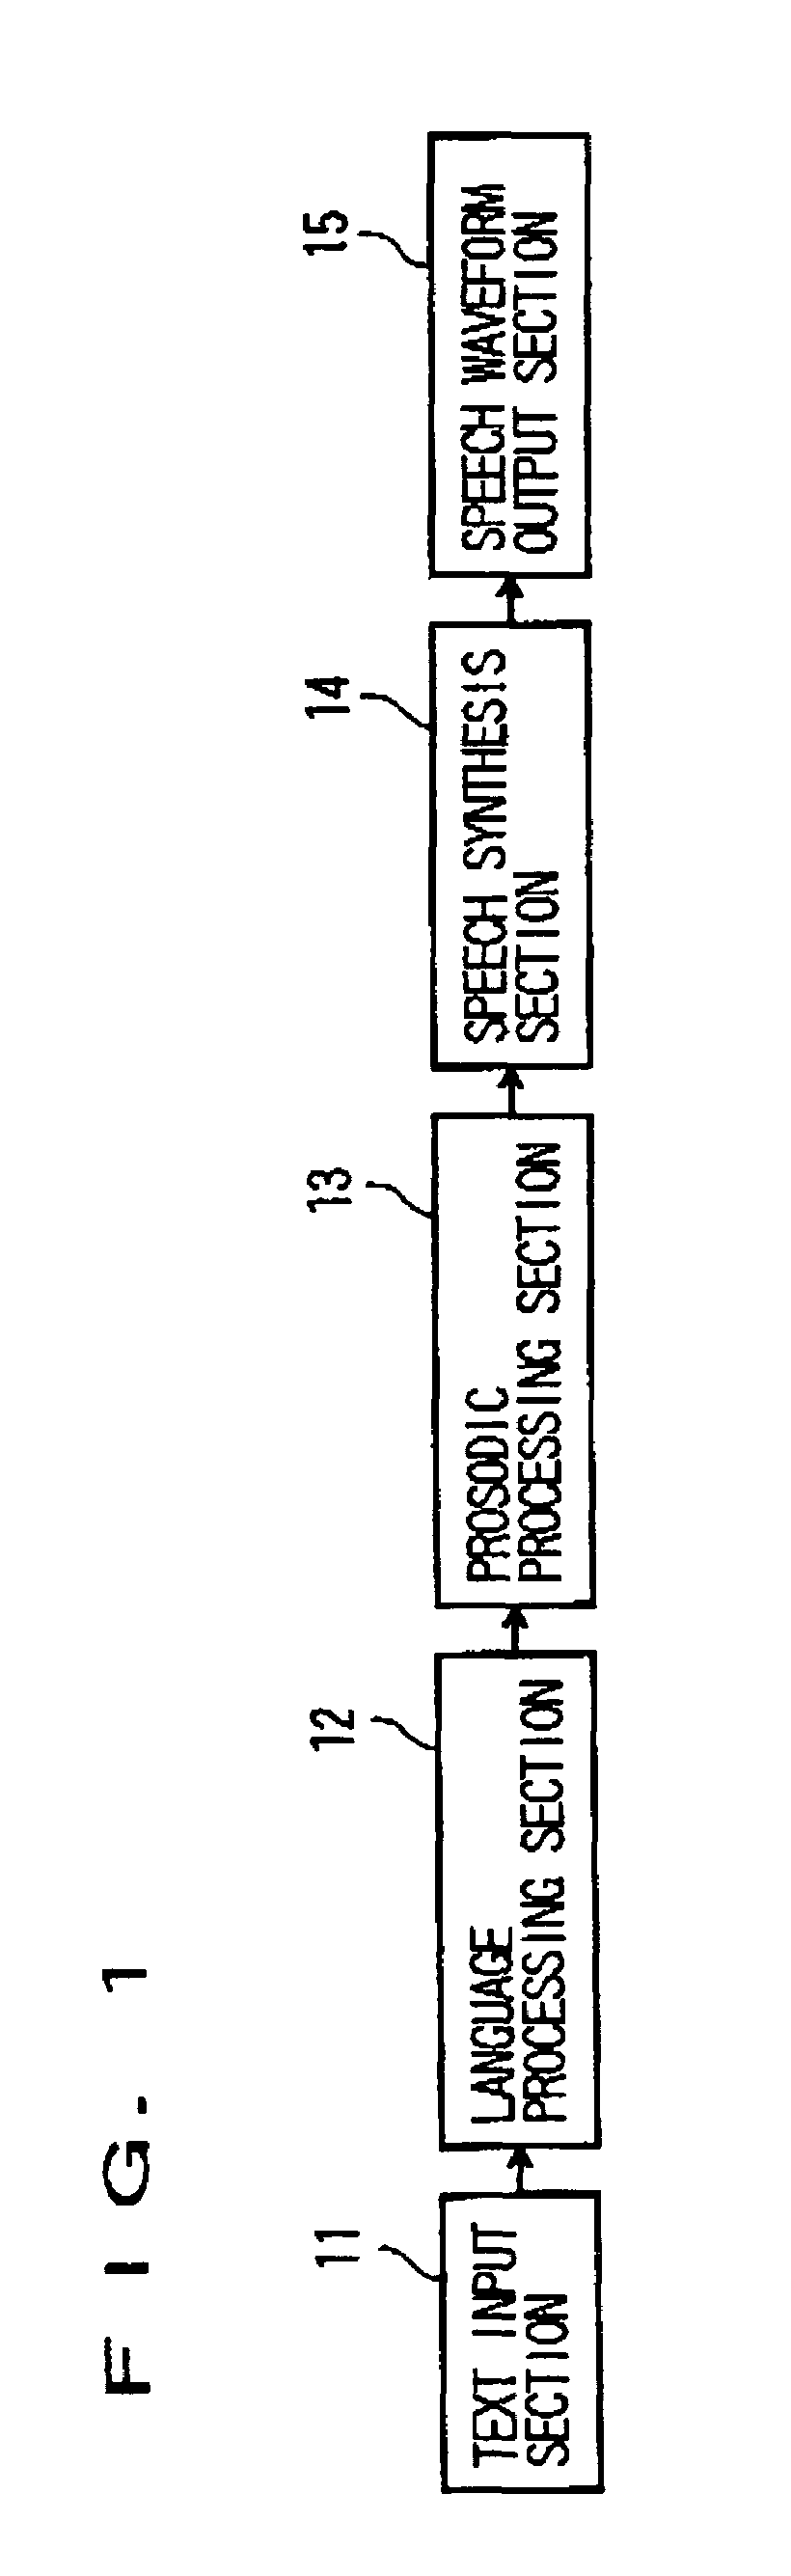 Speech synthesis system and method